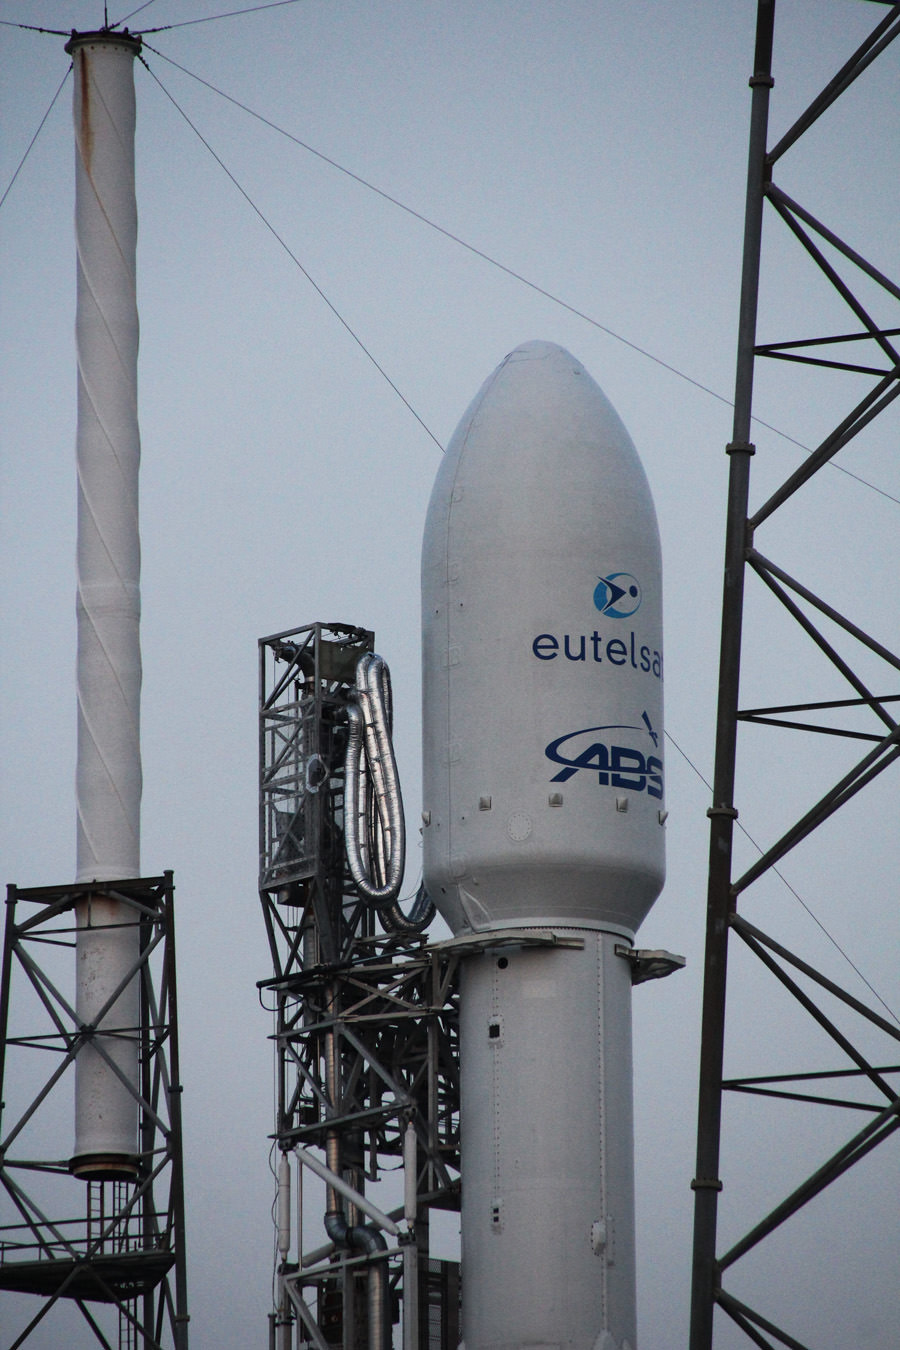 Up close view of nose cone carrying Eutelsat/ABS 2A comsats atop SpaceX Falcon 9 that launched on June 15, 2016 from Cape Canaveral Air Force Station, Fl.   Credit: Ken Kremer/kenkremer.com